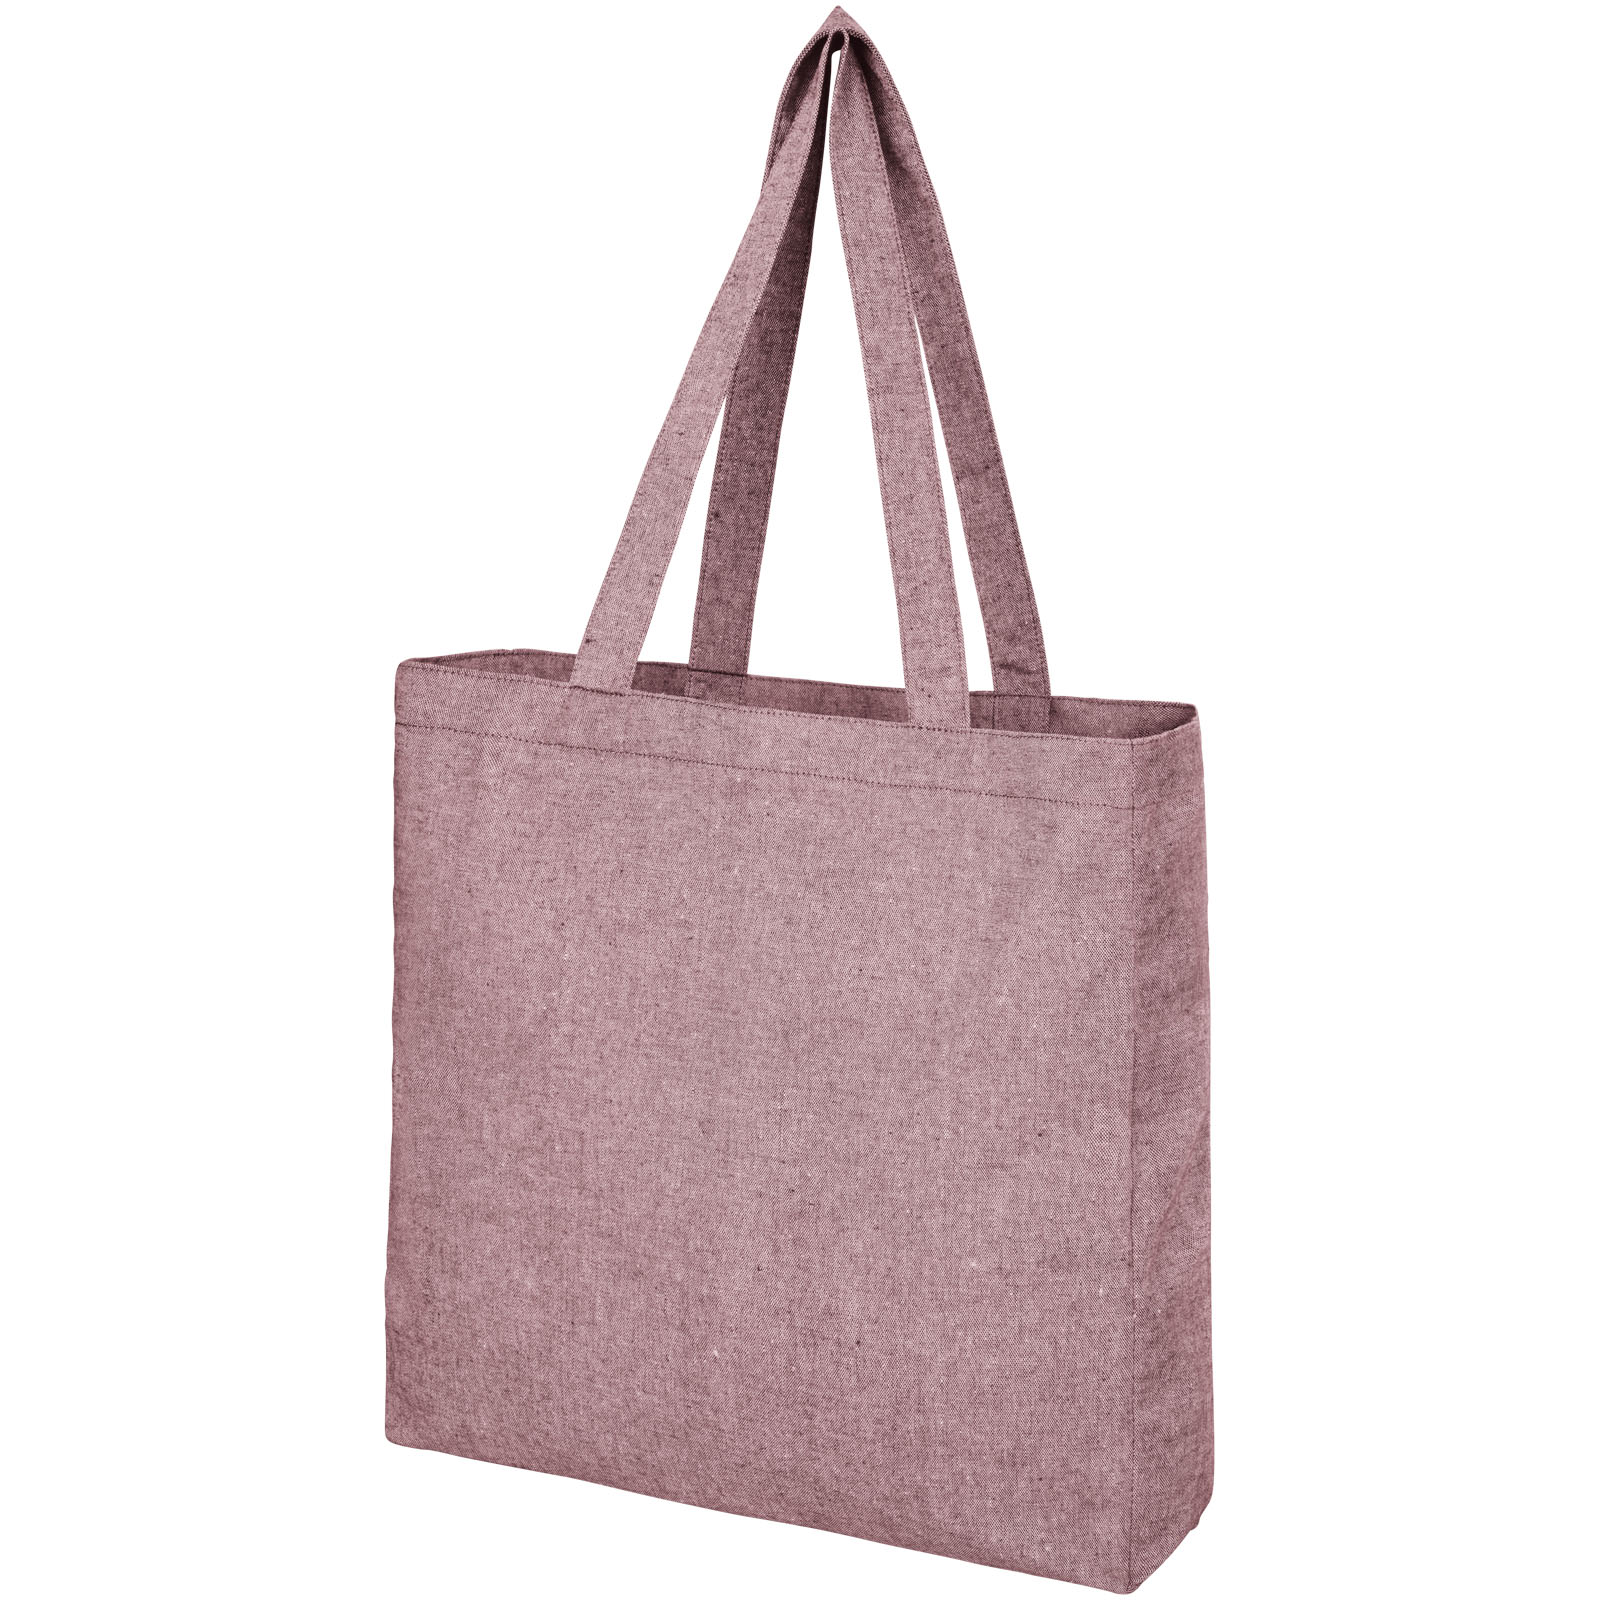 Advertising Shopping & Tote Bags - Pheebs 210 g/m² recycled gusset tote bag 13L - 0